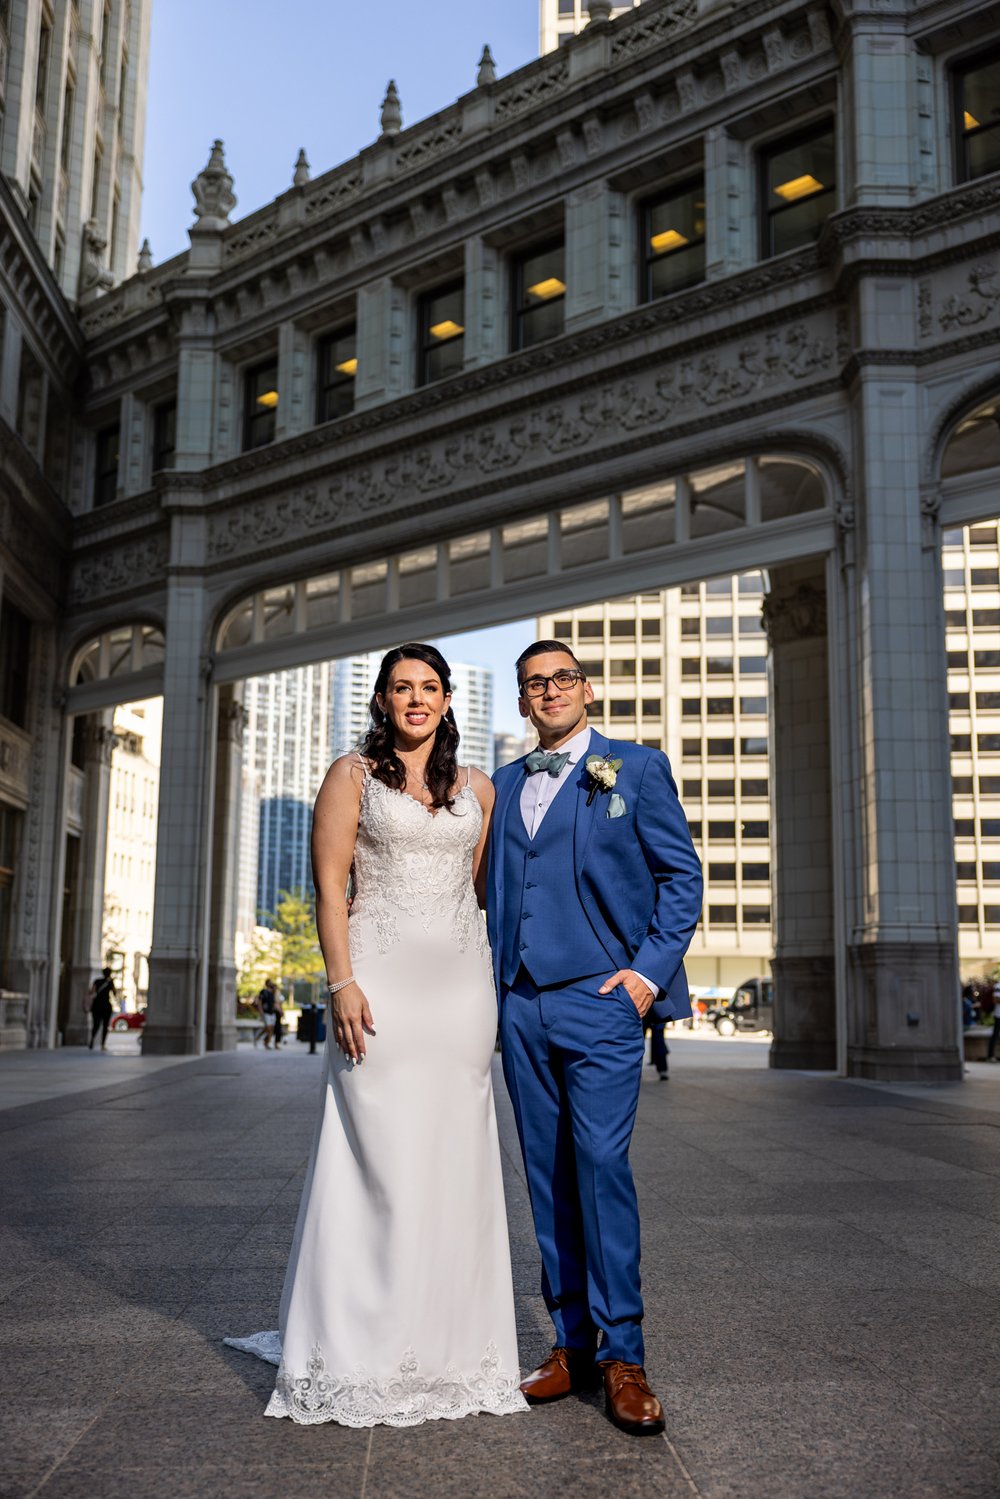 Alex Maldonado Photography | Chicago Wedding Photographer | bride and groom at wrigley building best locations in the city.jpg